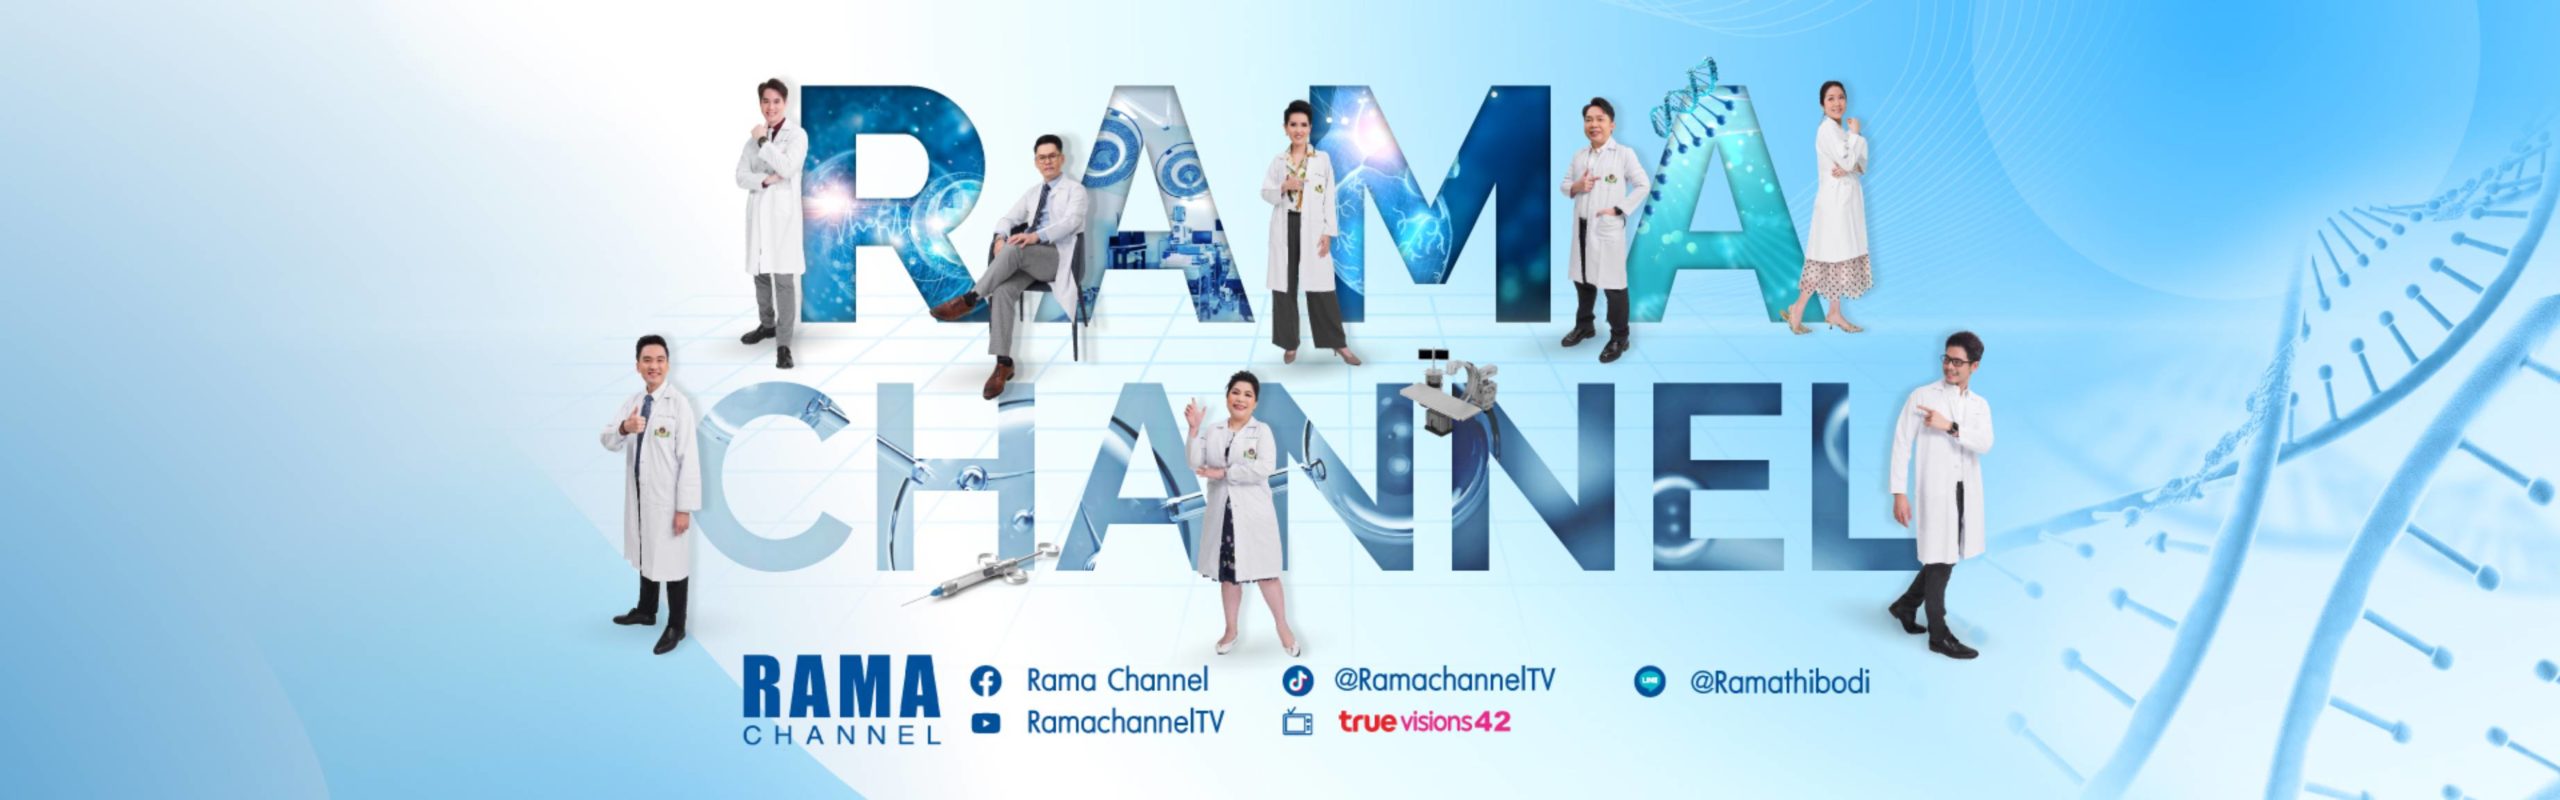 cover-fb-rama-channel-Side-1920x600 Px (1)